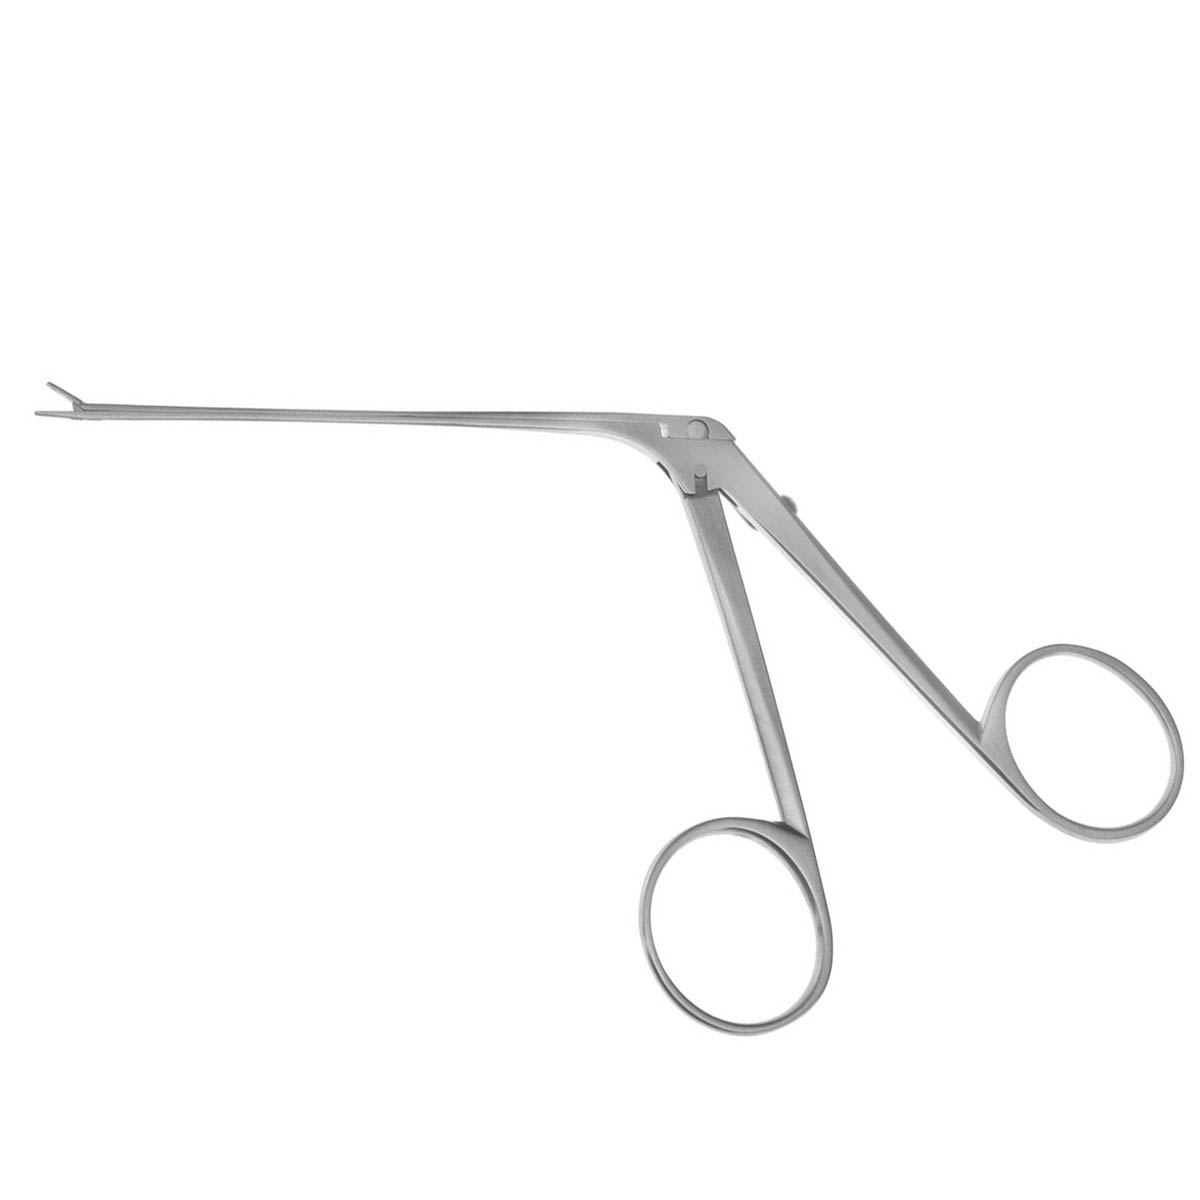 Alligator Forceps smooth jaws 4mm straight - BOSS Surgical Instruments